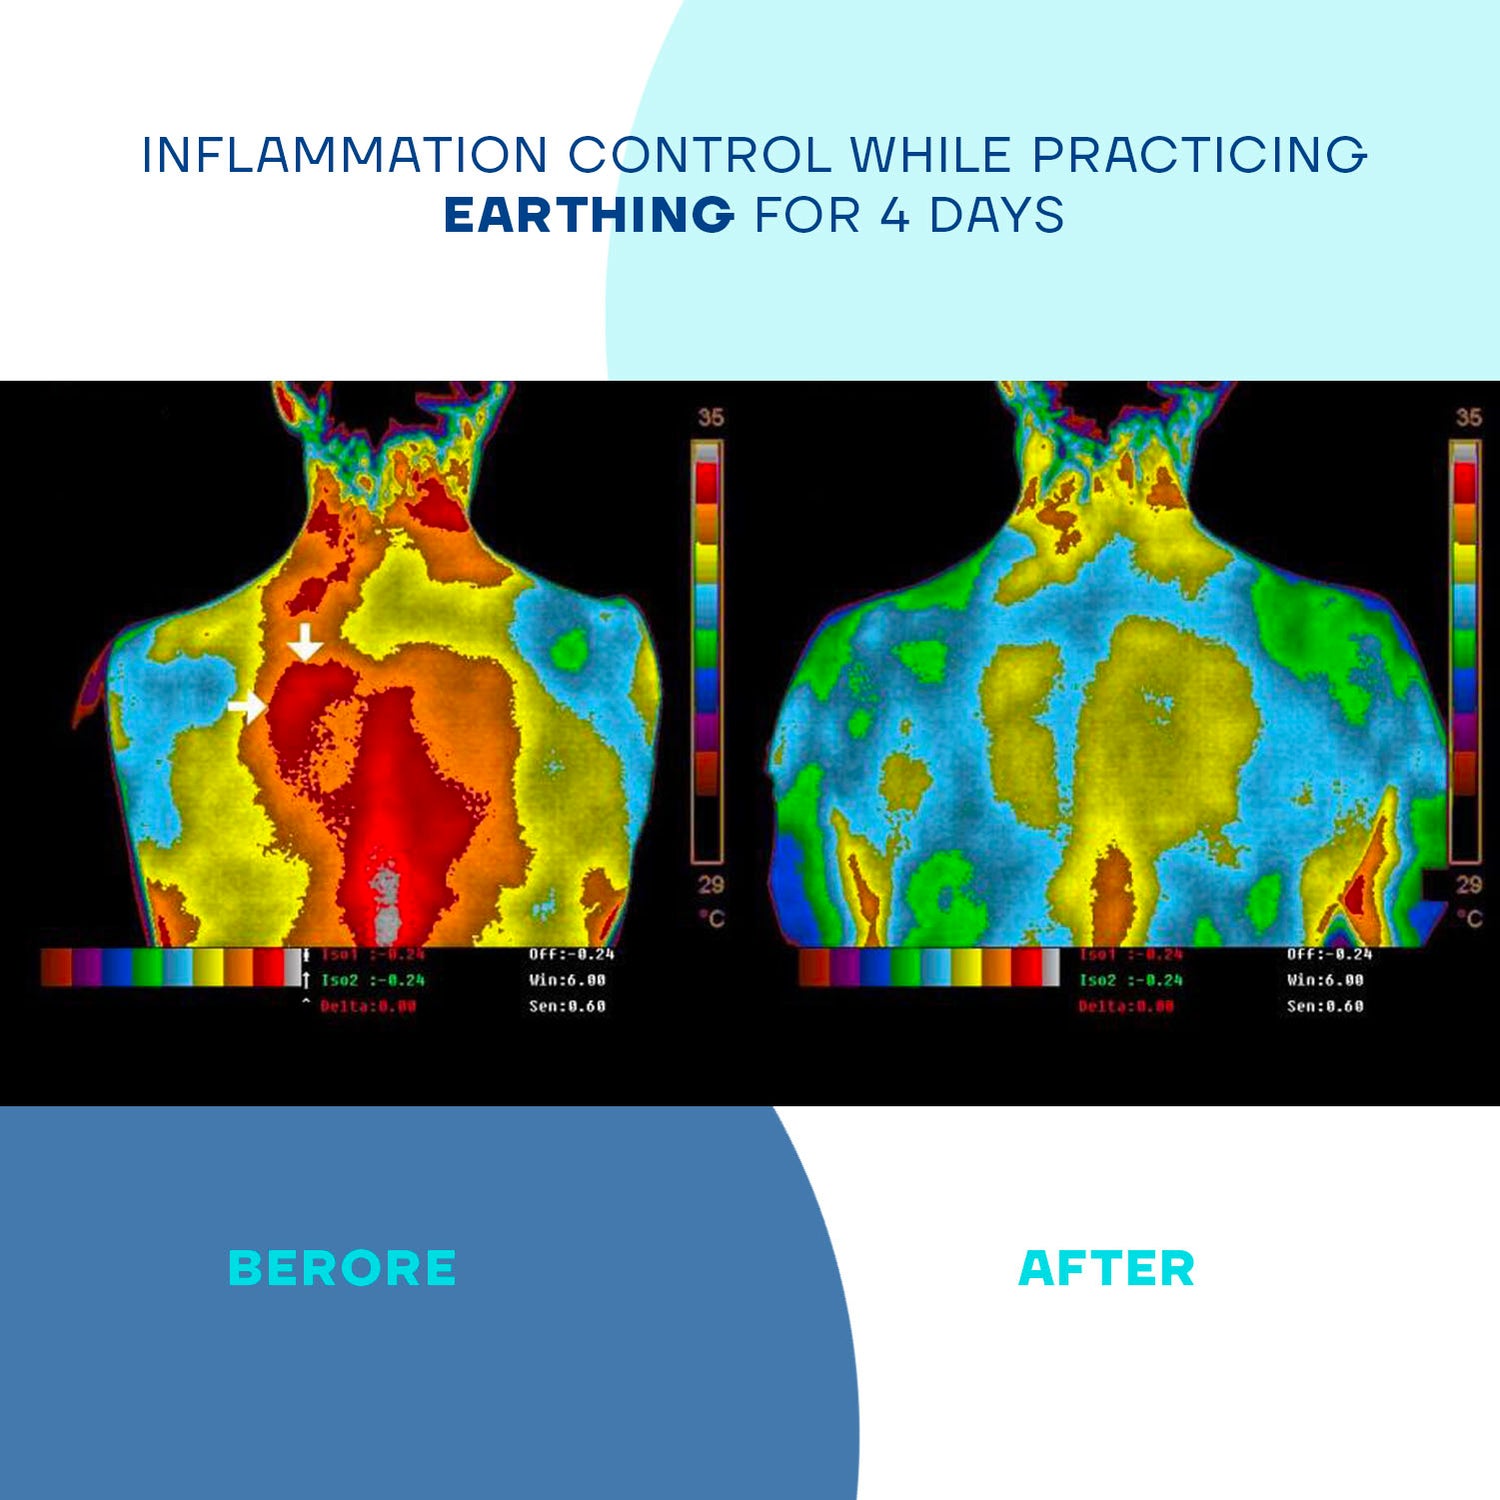 Inflammation control while practicing earthing for 4 days